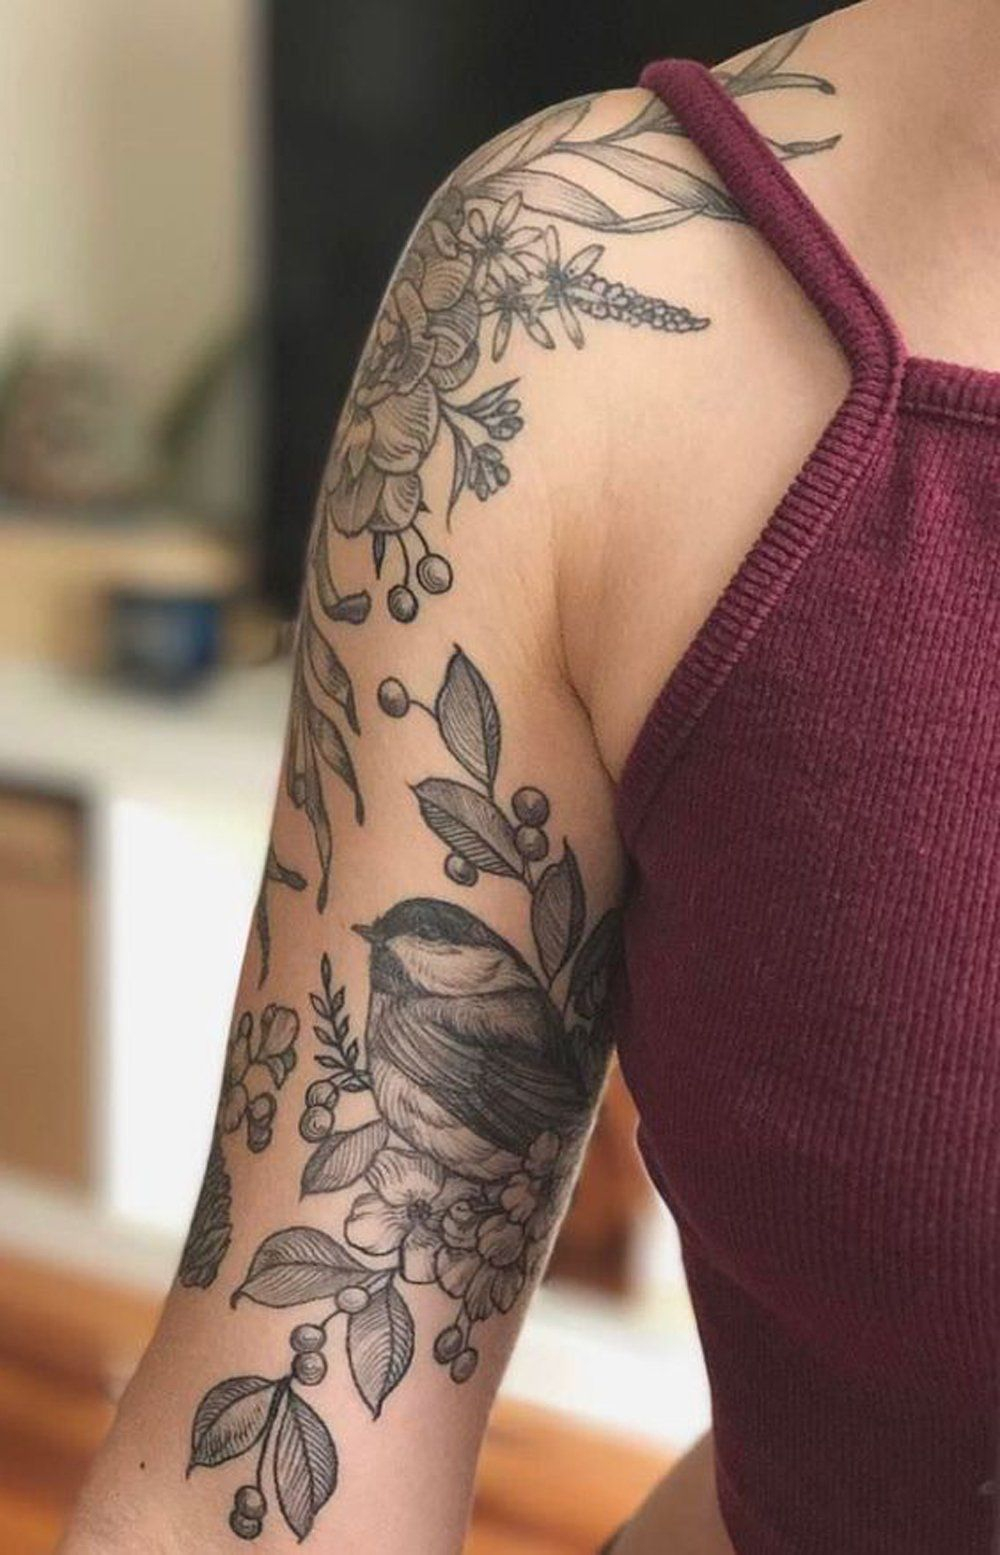 Girly Black Floral Flower Arm Sleeve Tattoo Ideas For Women in dimensions 1000 X 1555